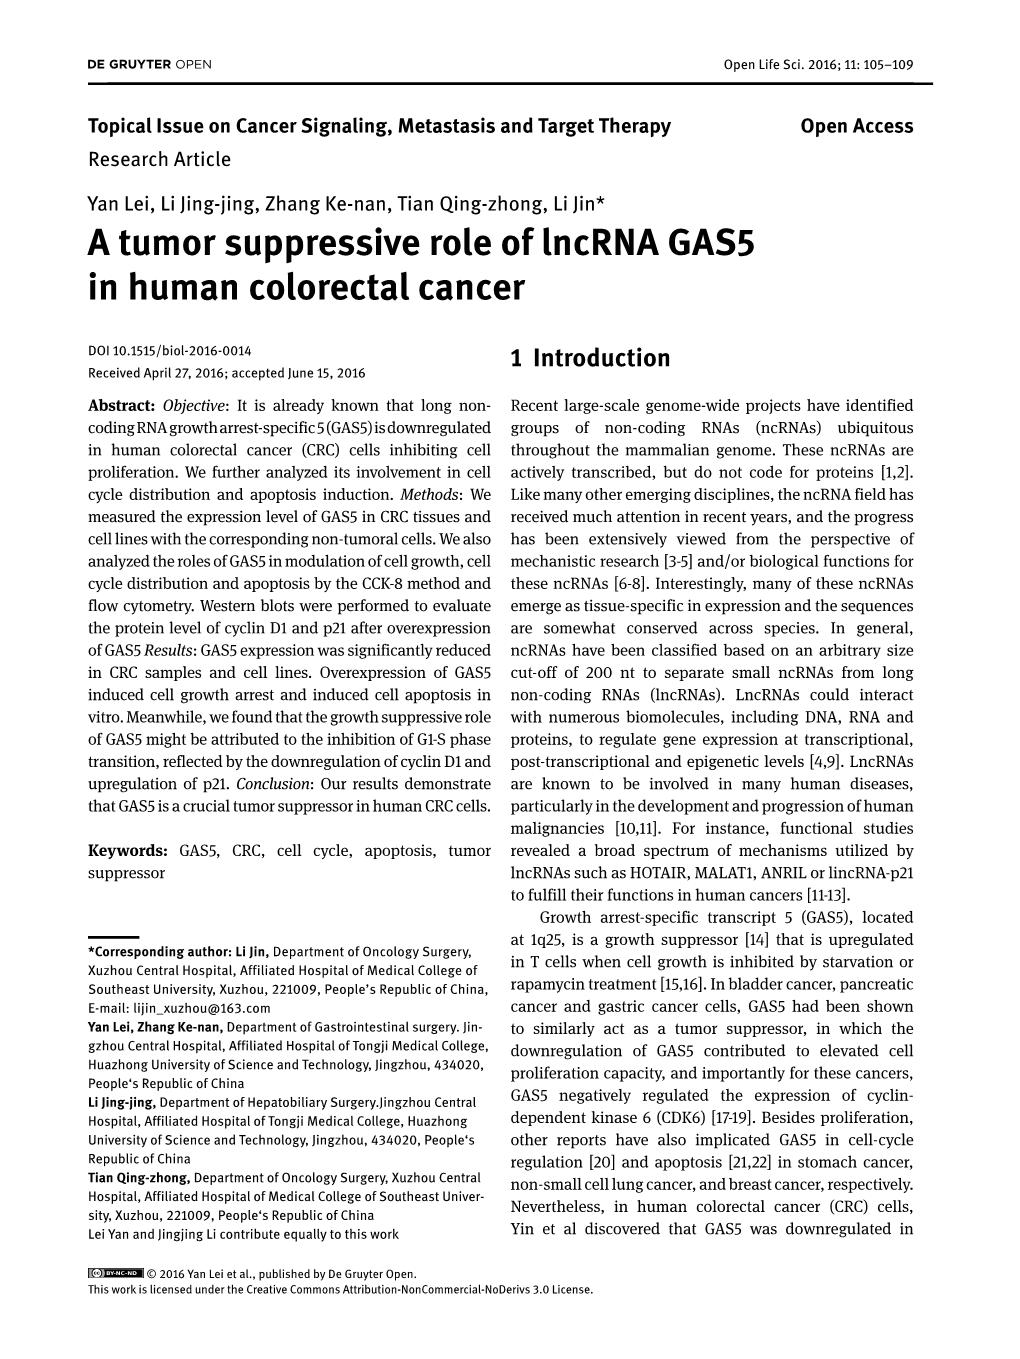 A Tumor Suppressive Role of Lncrna GAS5 in Human Colorectal Cancer